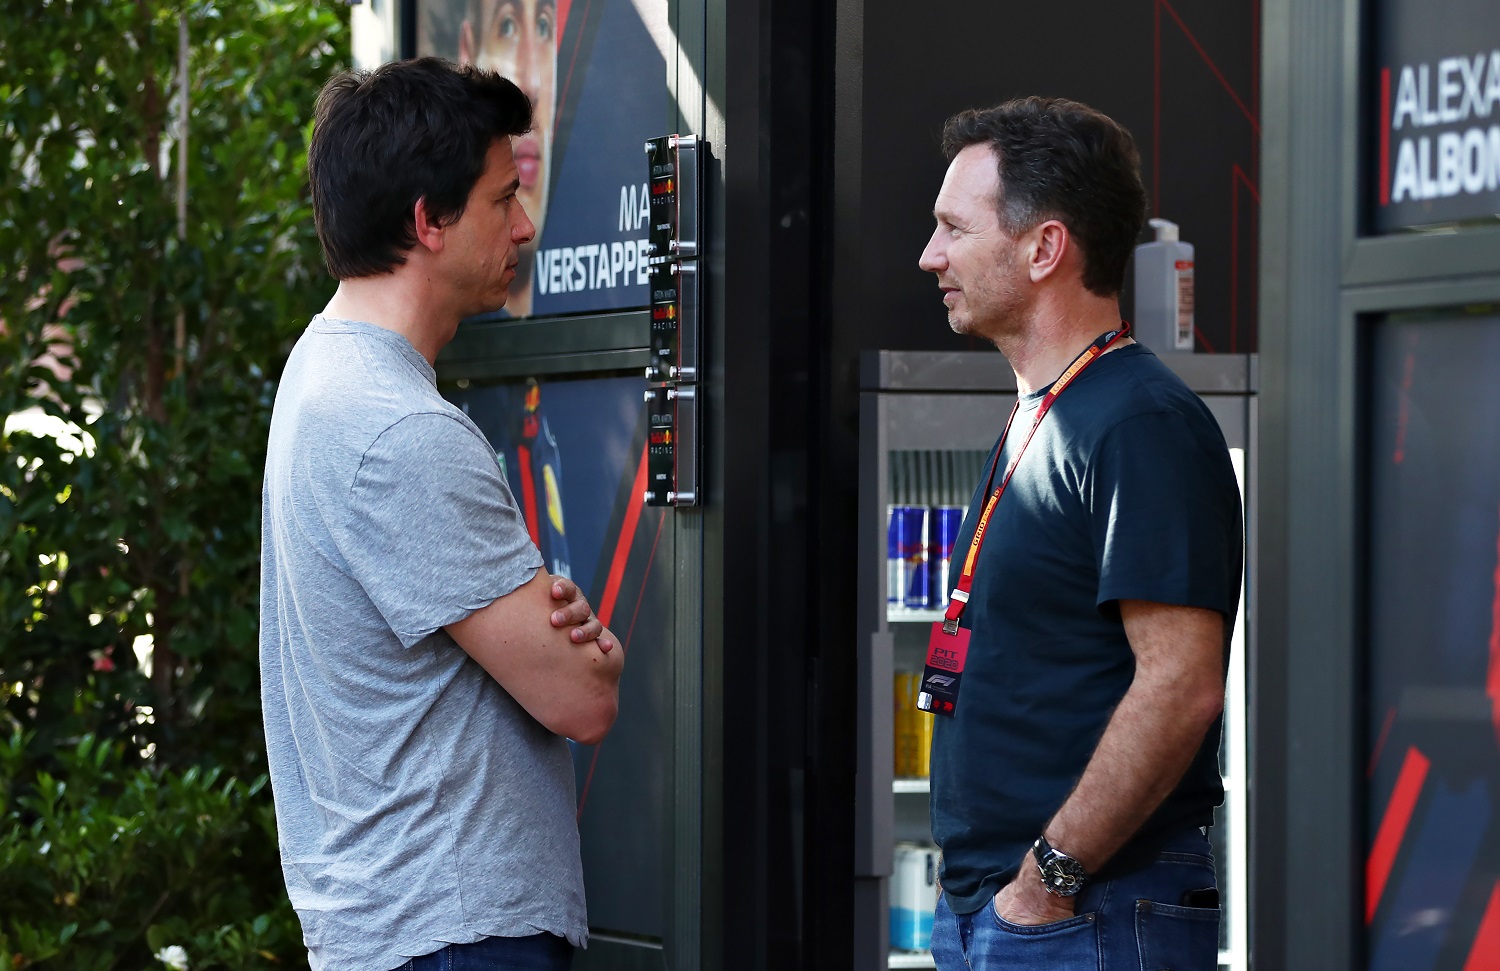 Mercedes executive director Toto Wolff and Red Bull Racing team principal Christian Horner talk in the paddock during previews ahead of the Formula 1 Grand Prix of Australia at Melbourne Grand Prix Circuit on March 12, 2020.